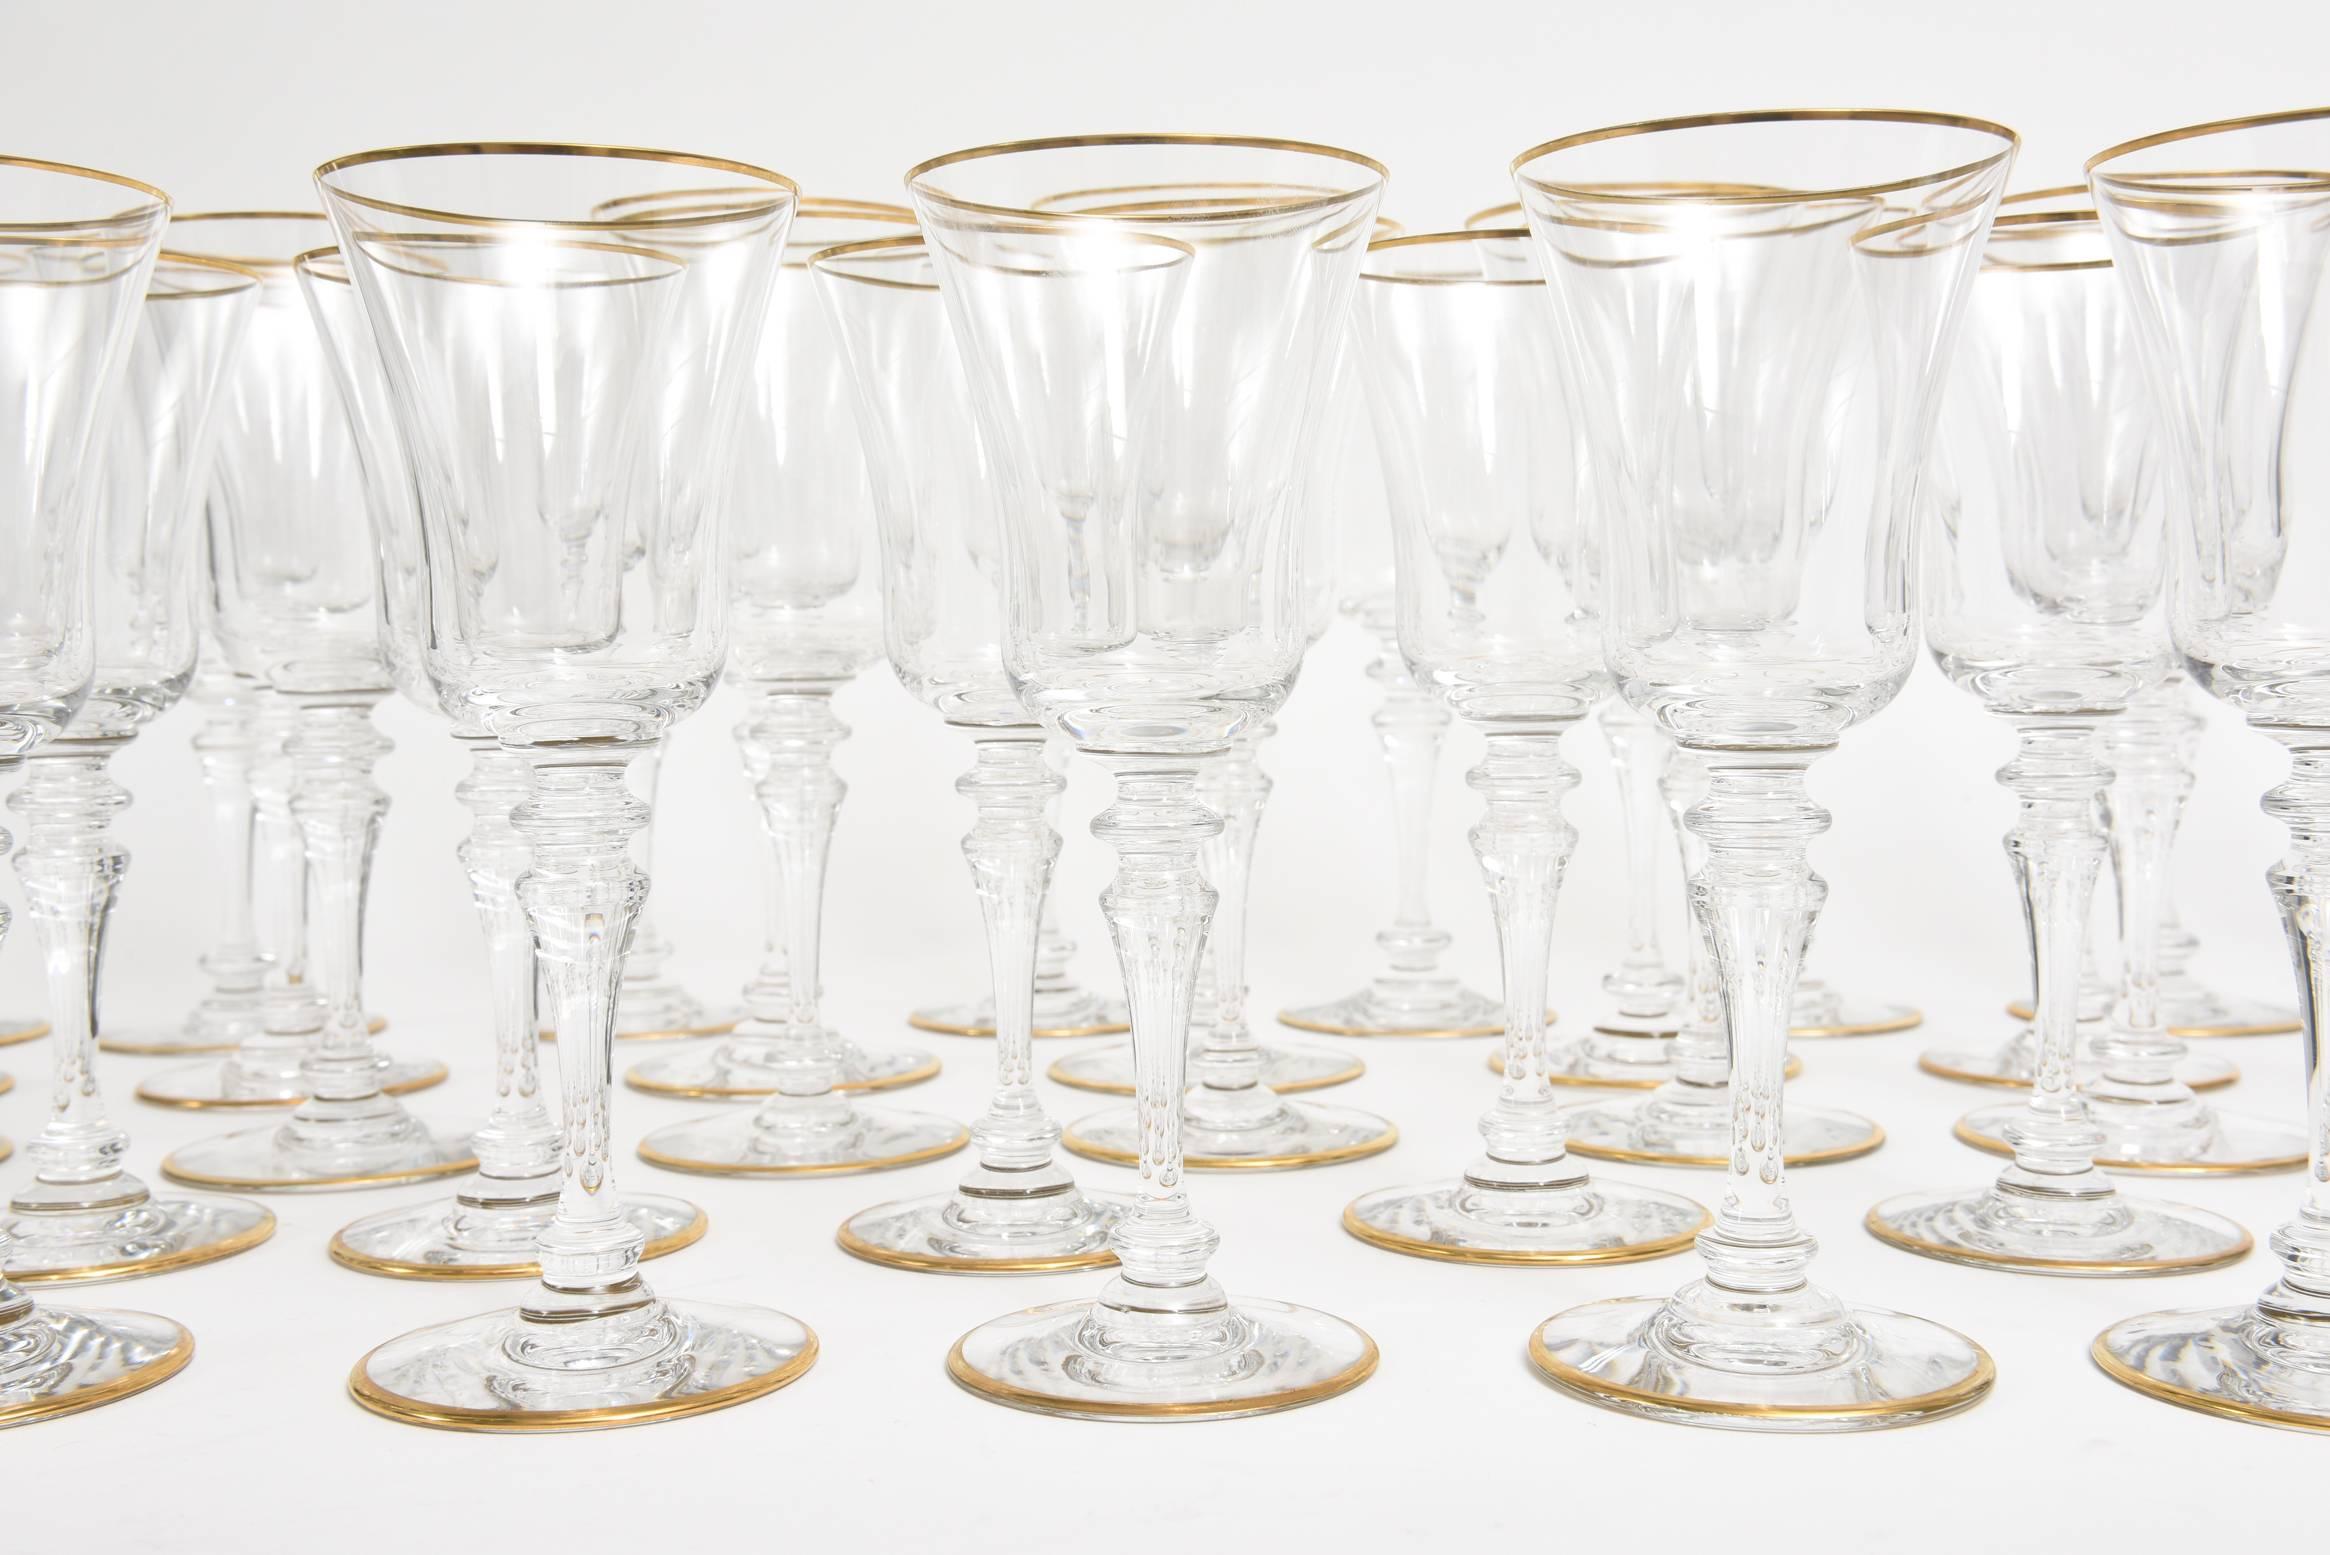 This stunning set of 34 signed Baccarat crystal stemware is from the 1980s. It is called 